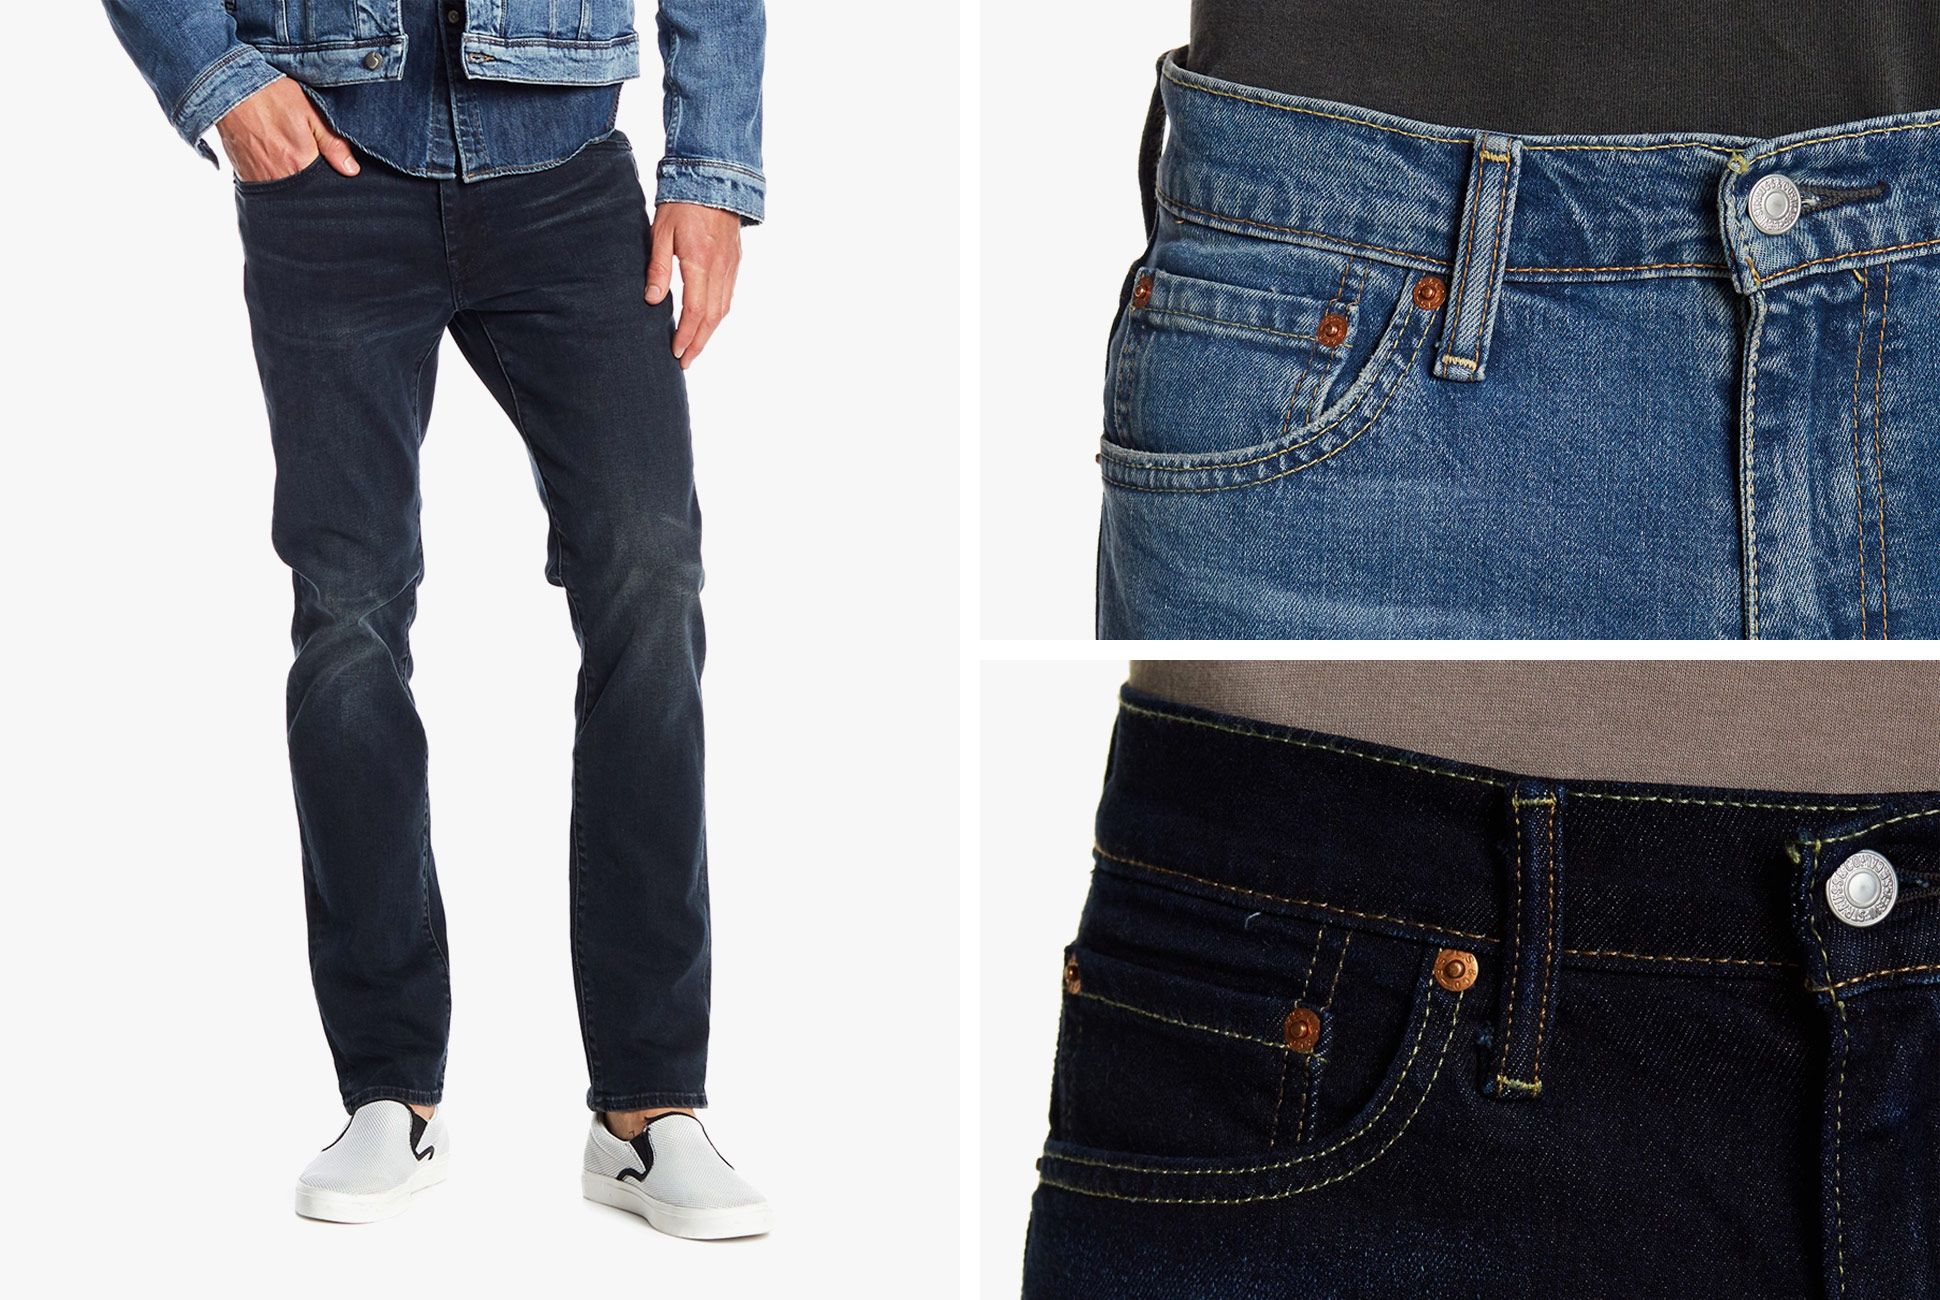 Levi's Classic Slim-Fit Jeans Are Now 